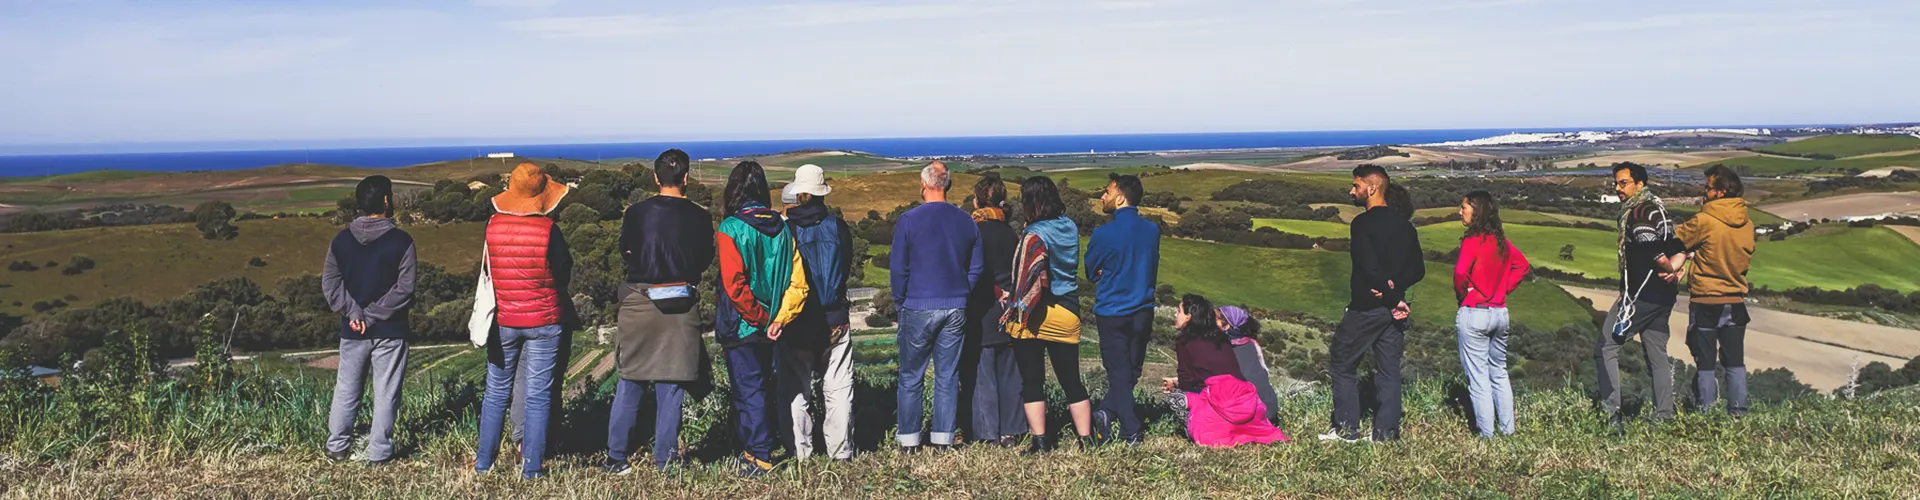 The erasmus group looking at the horizon